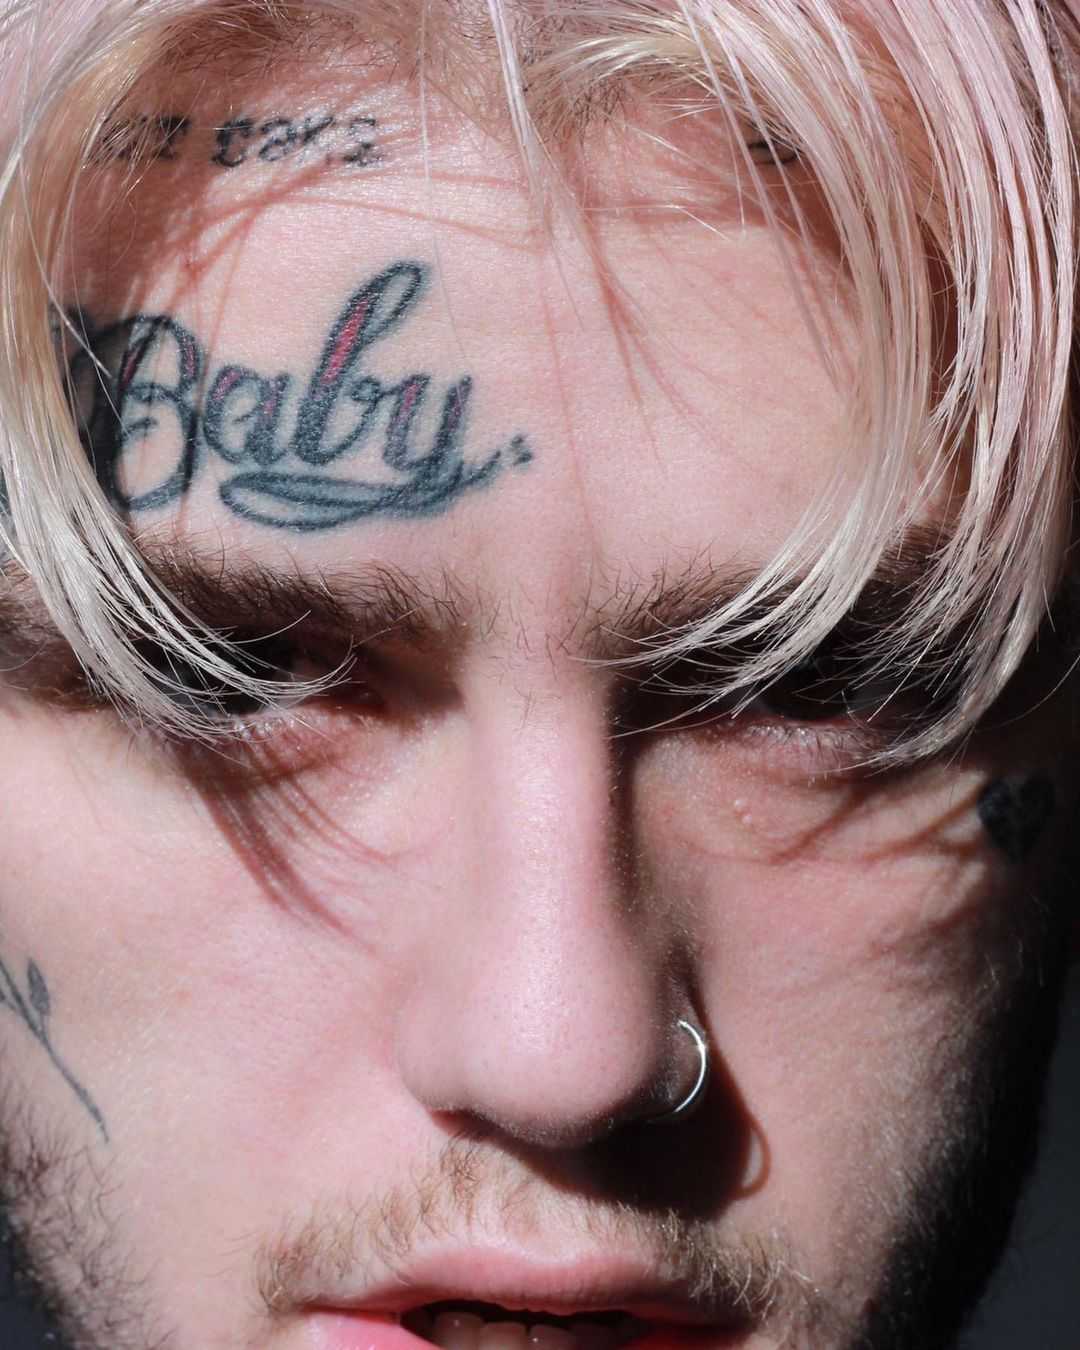 People Lil Peep Men Face Tattoo Rapper Pierced Nose Crybaby 1080x1350